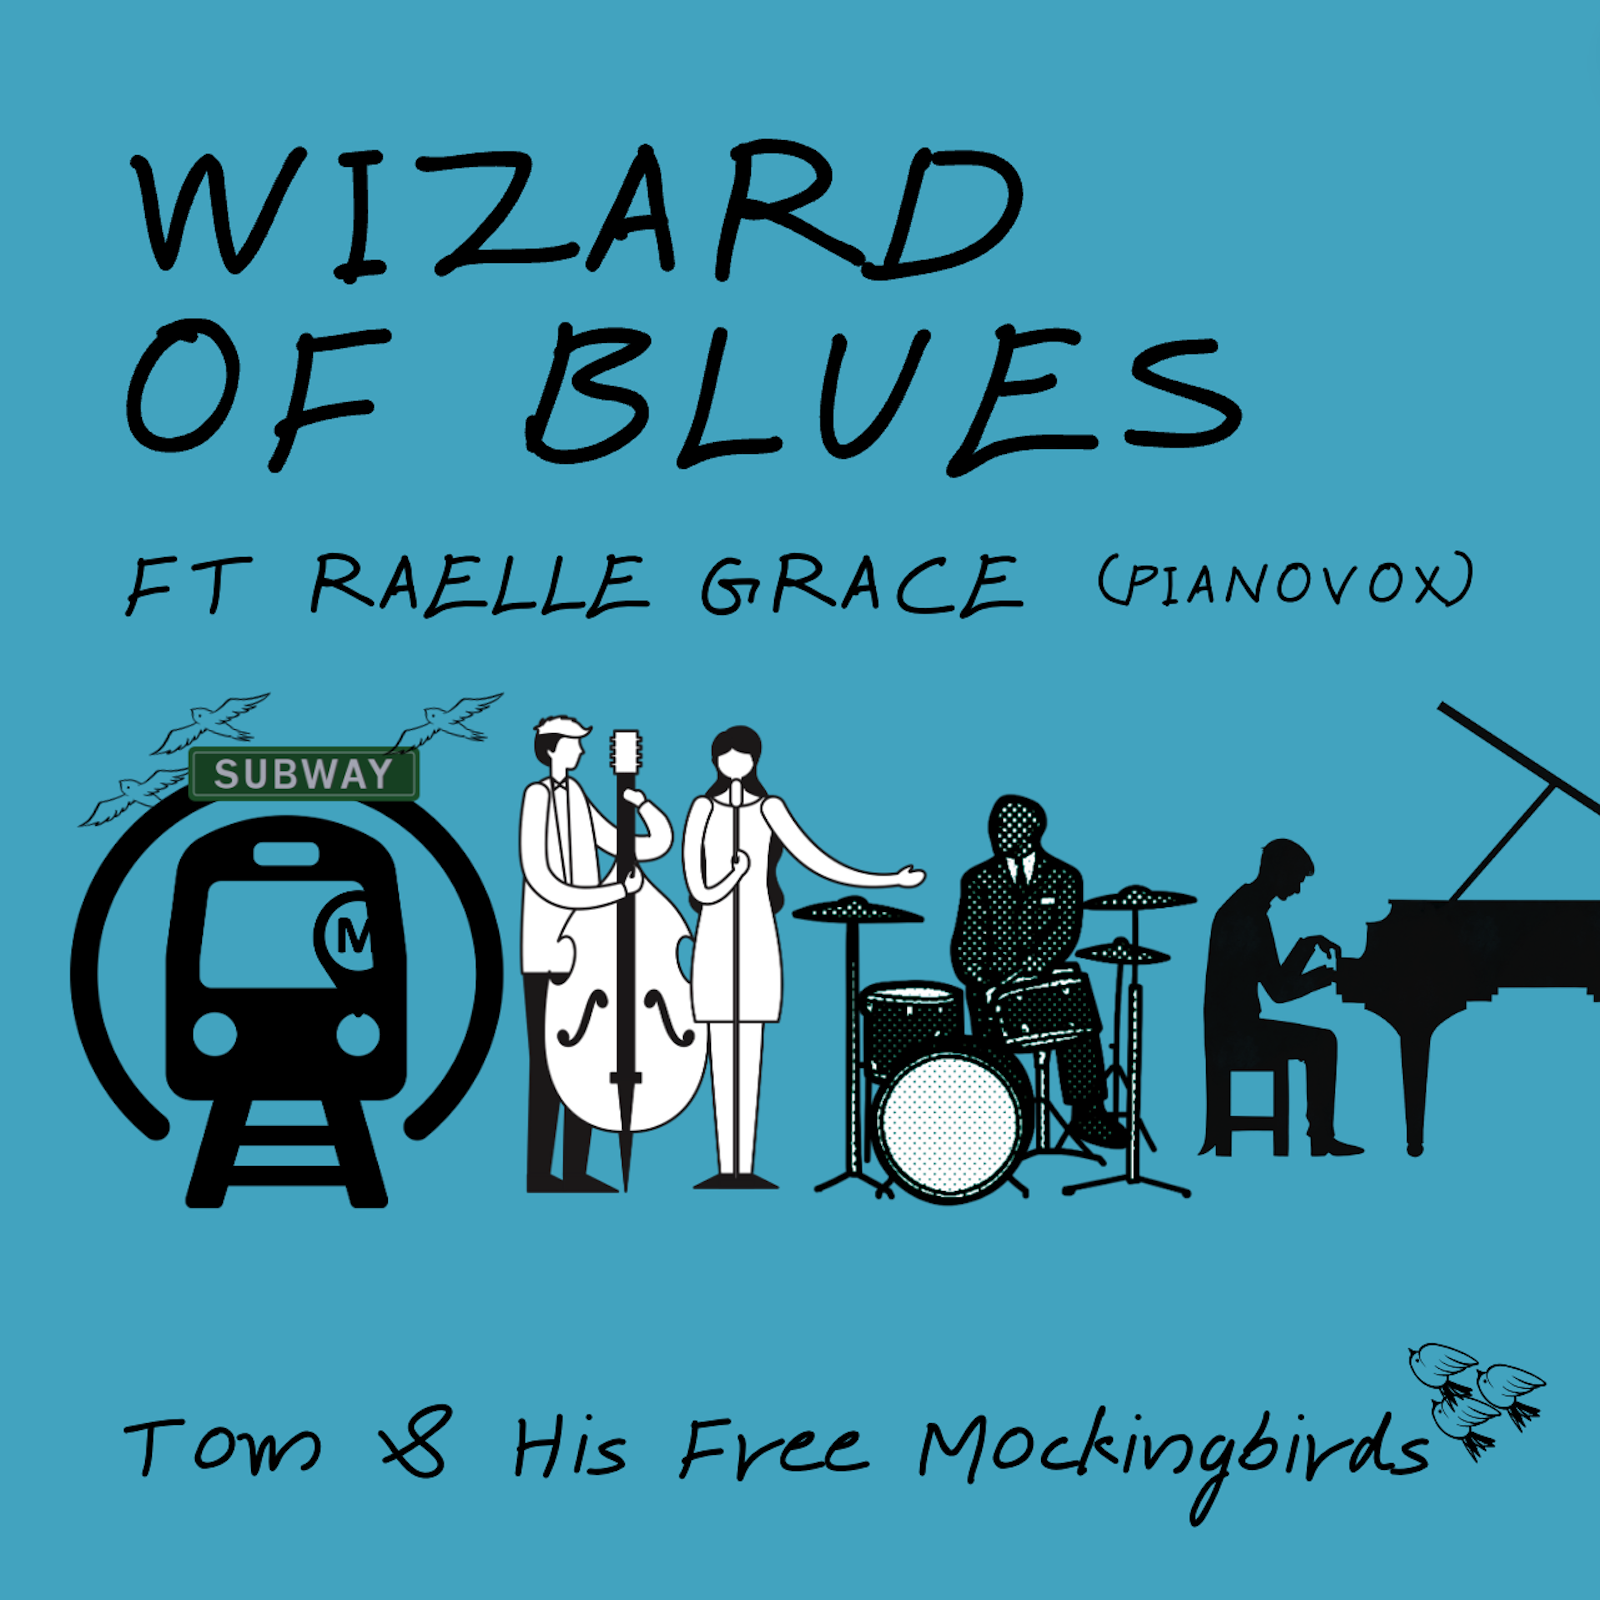 Tom & His Free Mockingbirds: Setting the Stage Ablaze with ‘Wizards of Blues’ – A Playlist Sensation